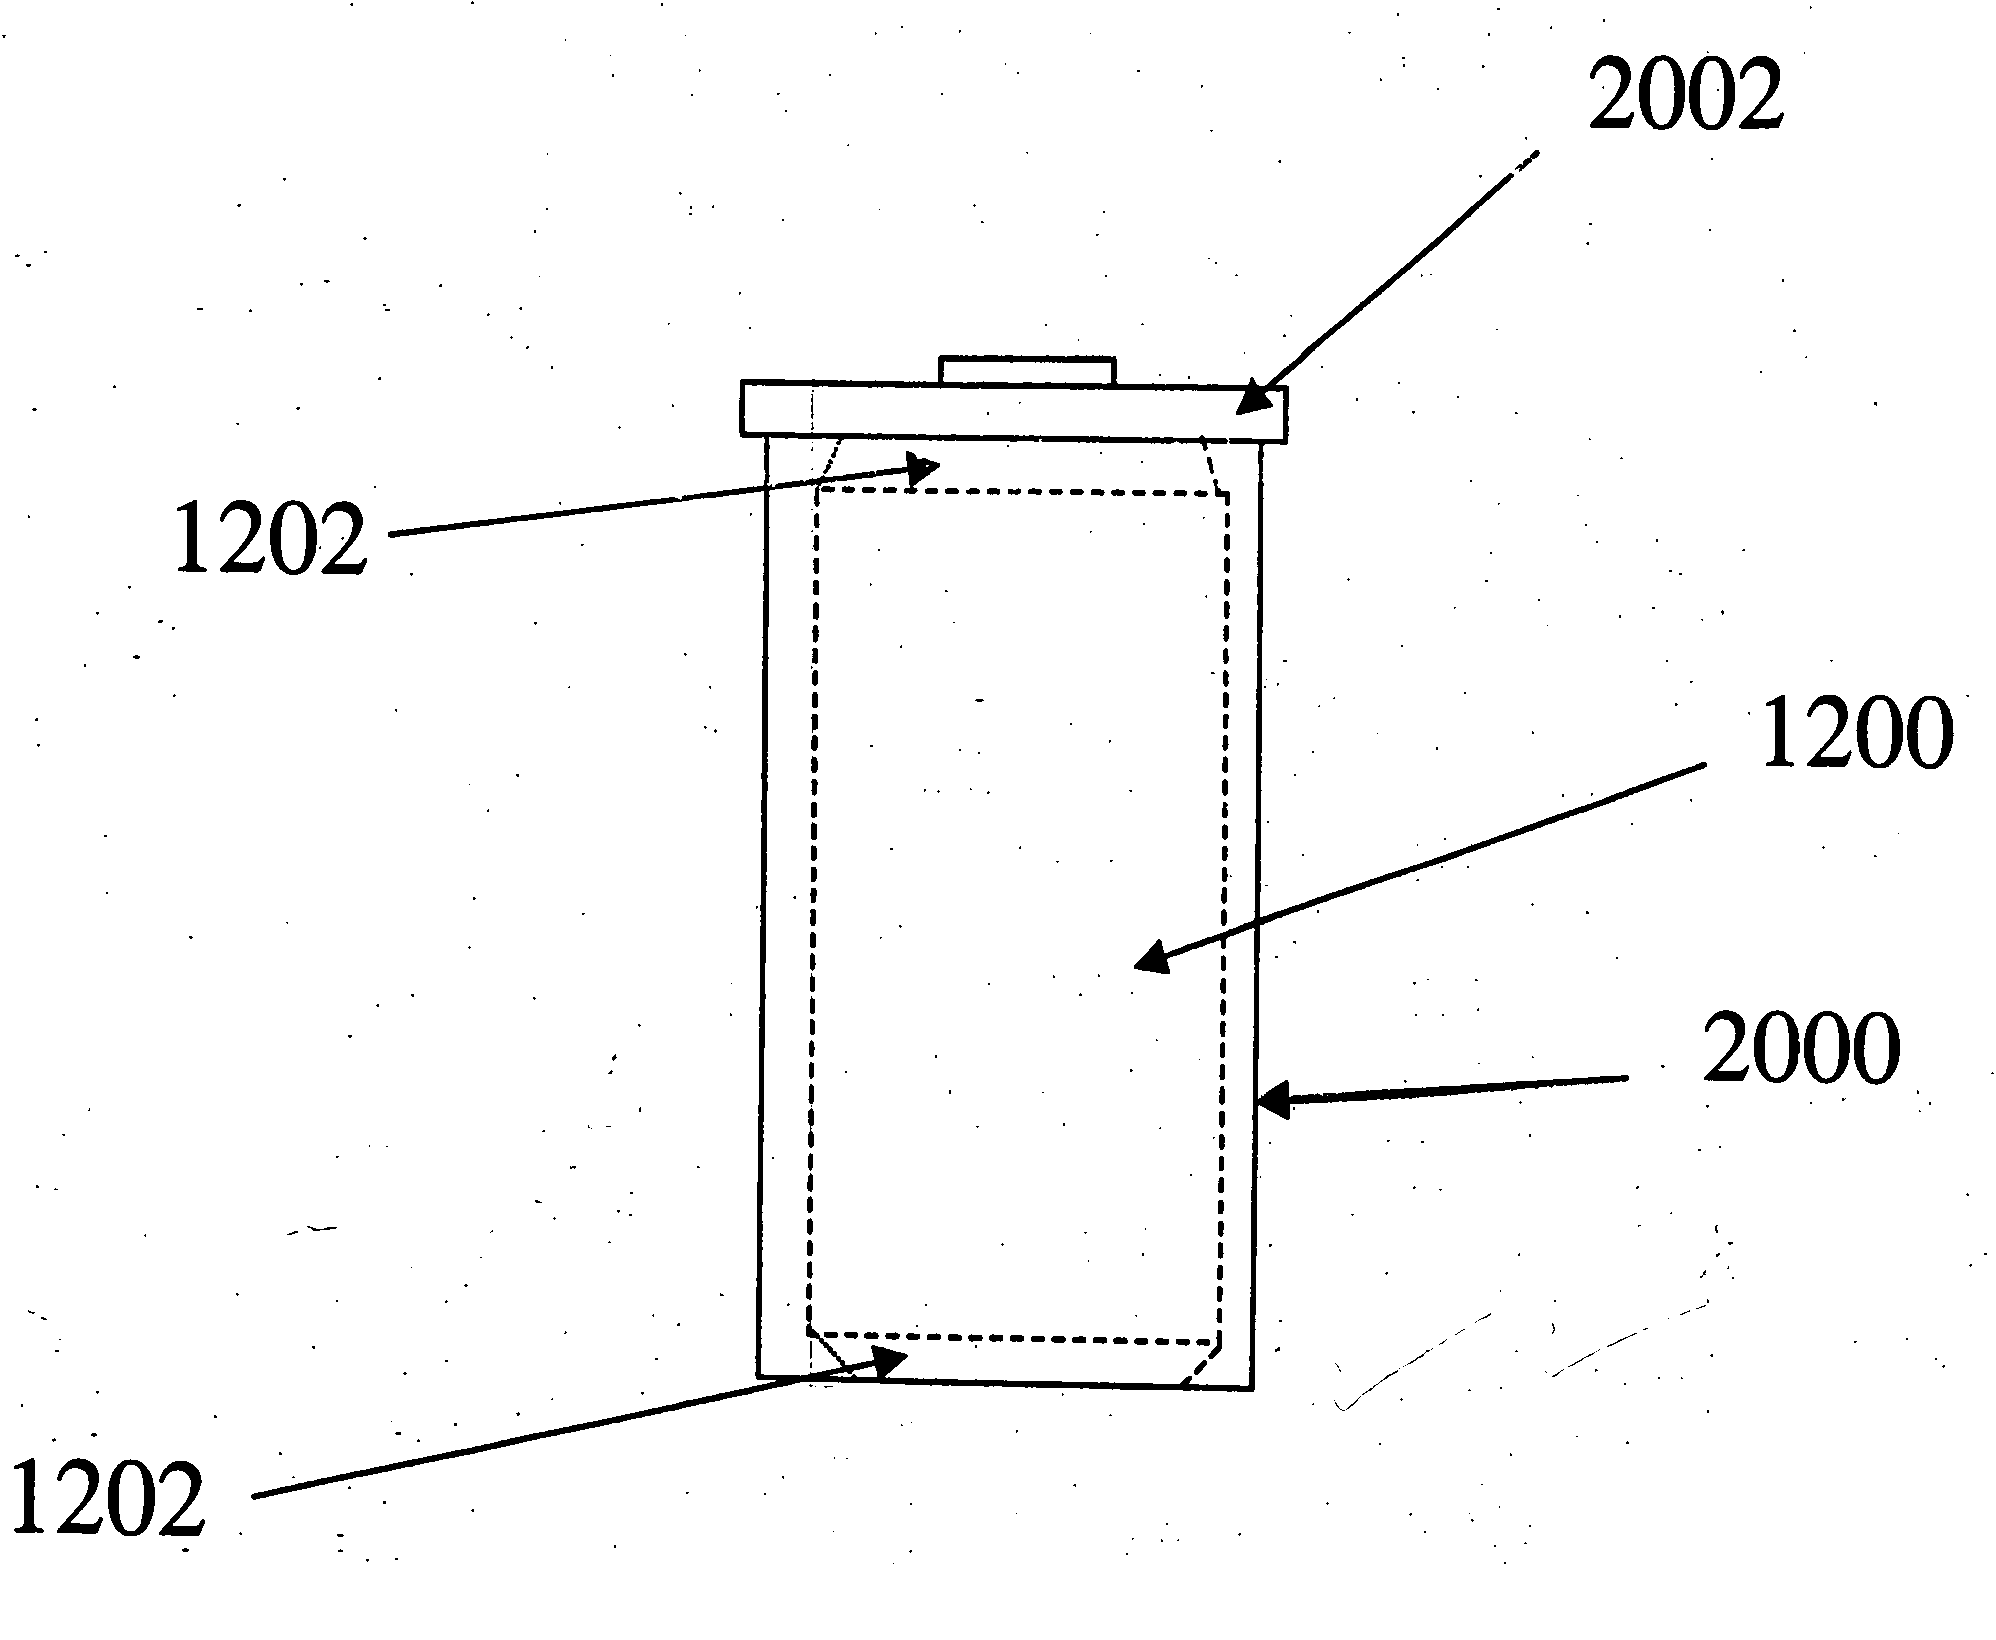 Particles based electrodes and methods of making same